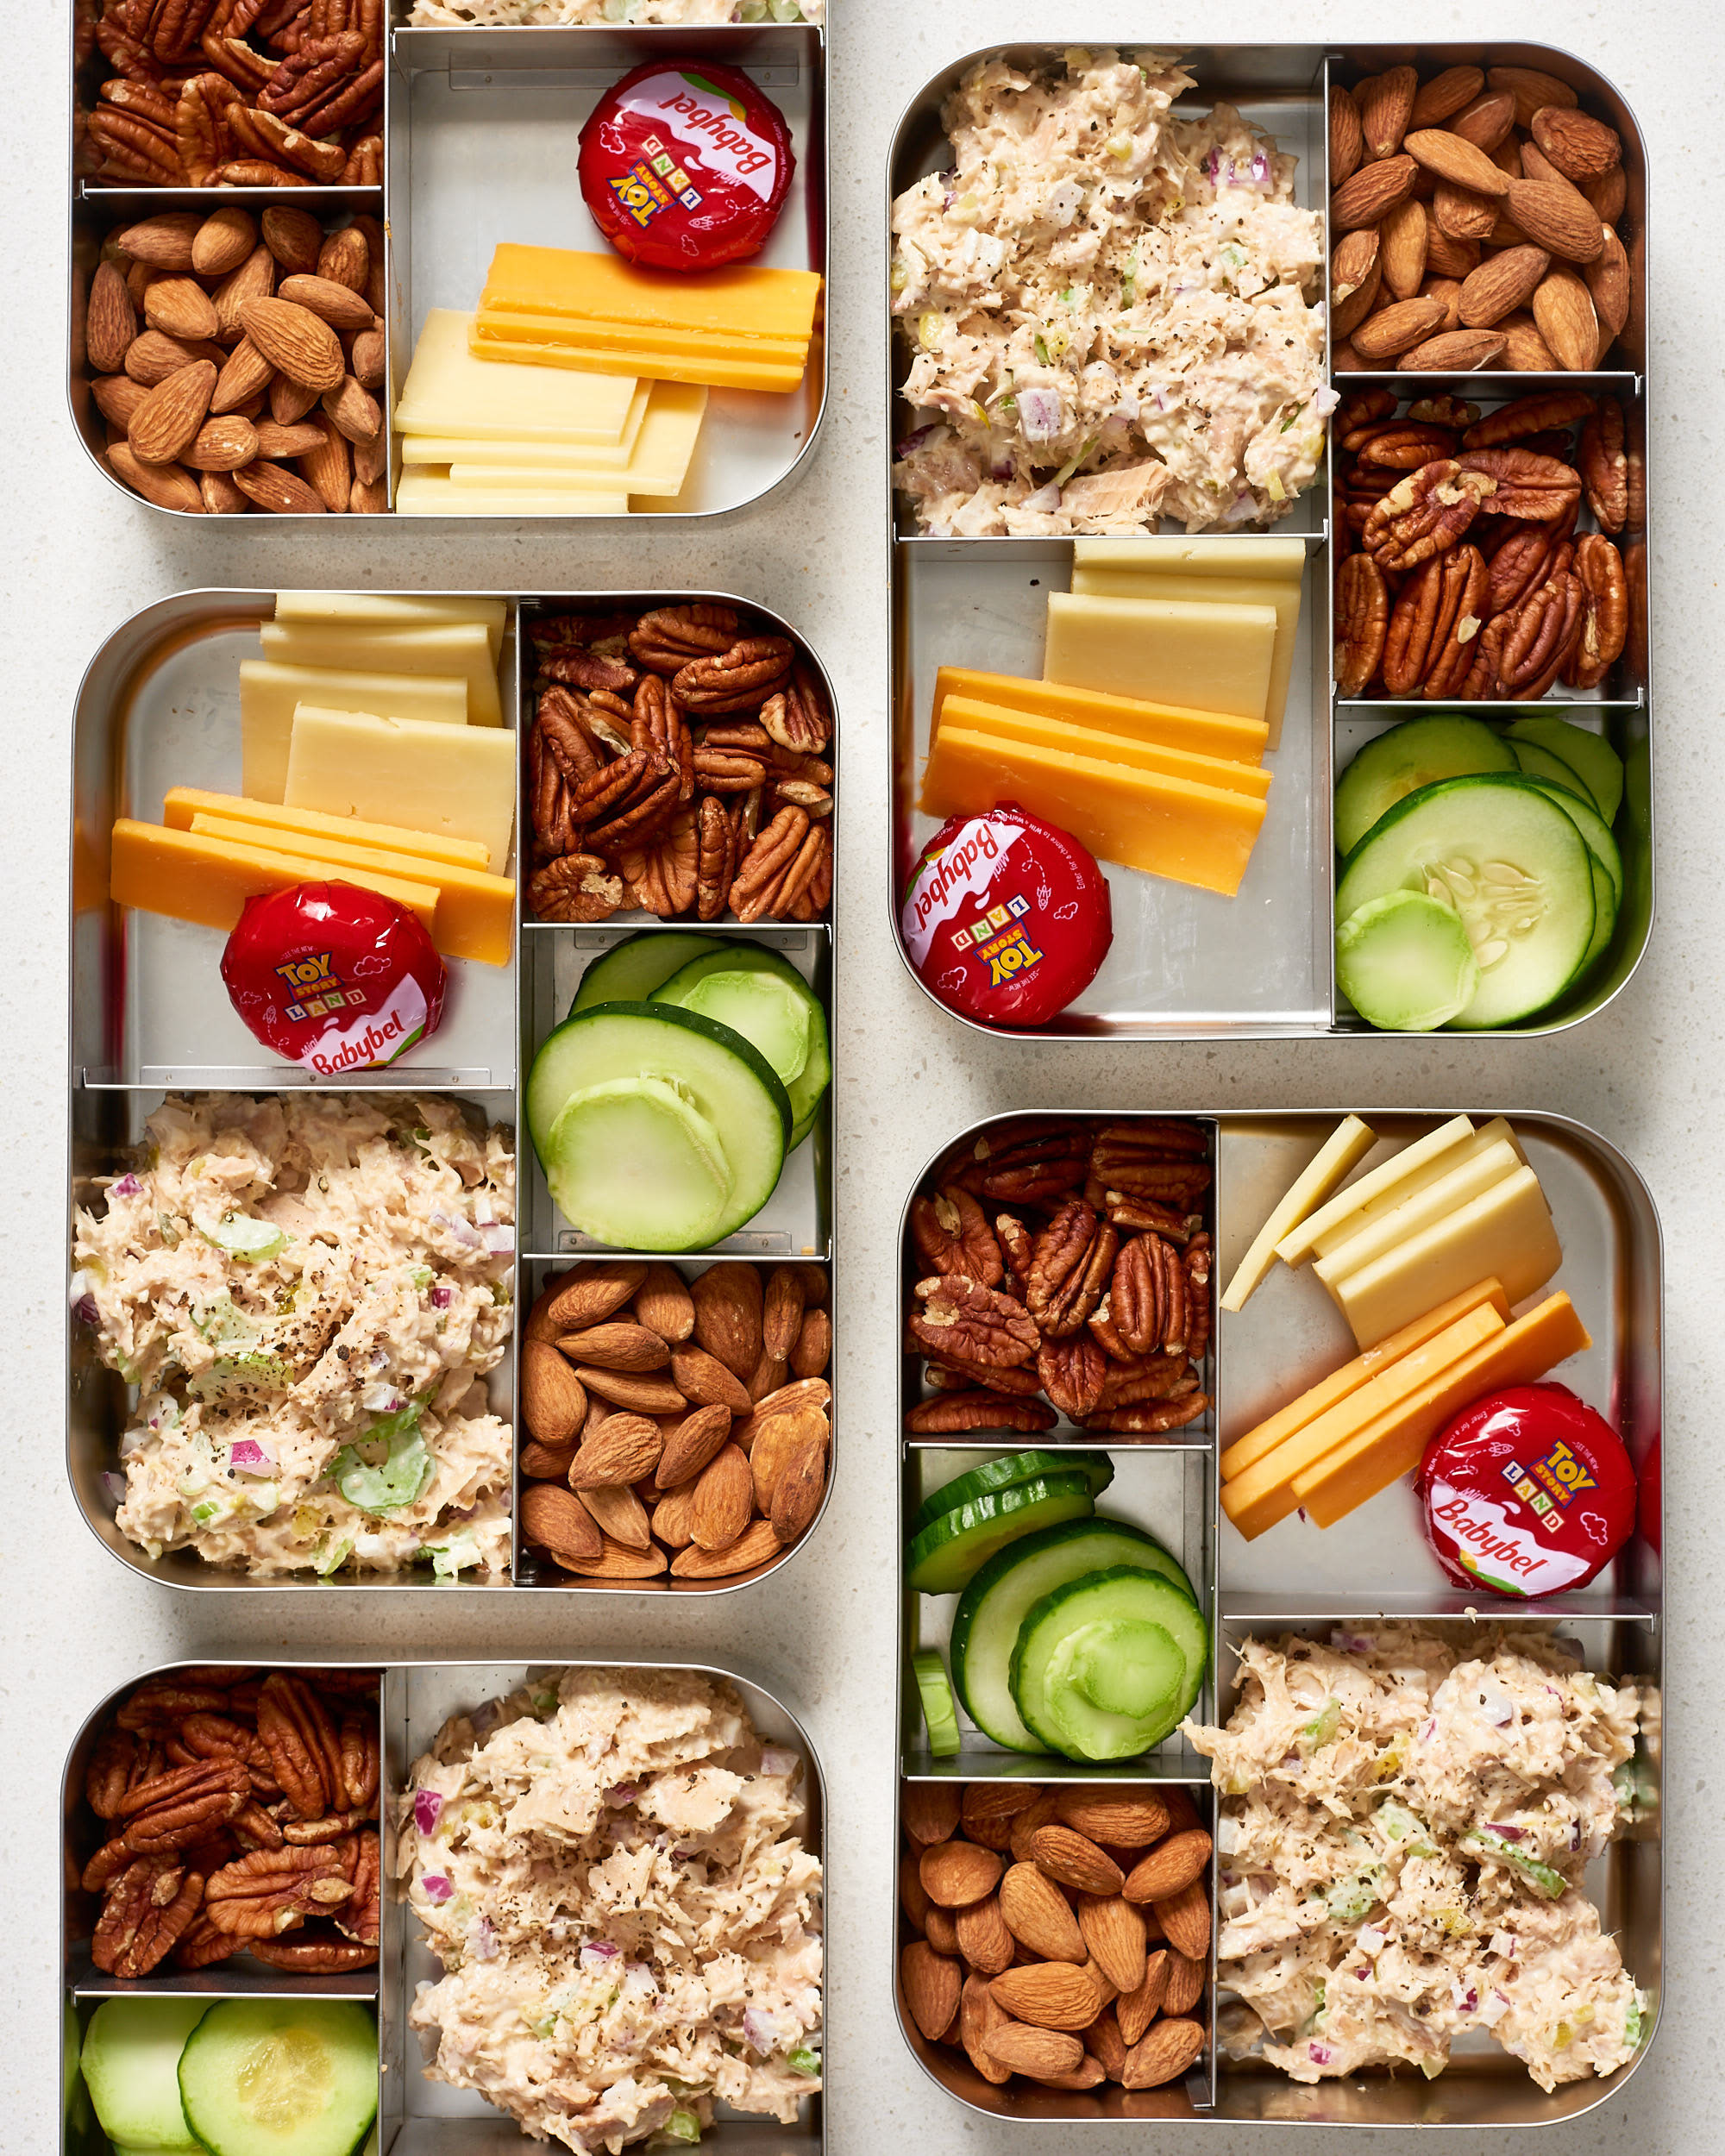 Healthy Keto Lunches For Work
 Fast Keto Meal Prep in Under 2 Hours